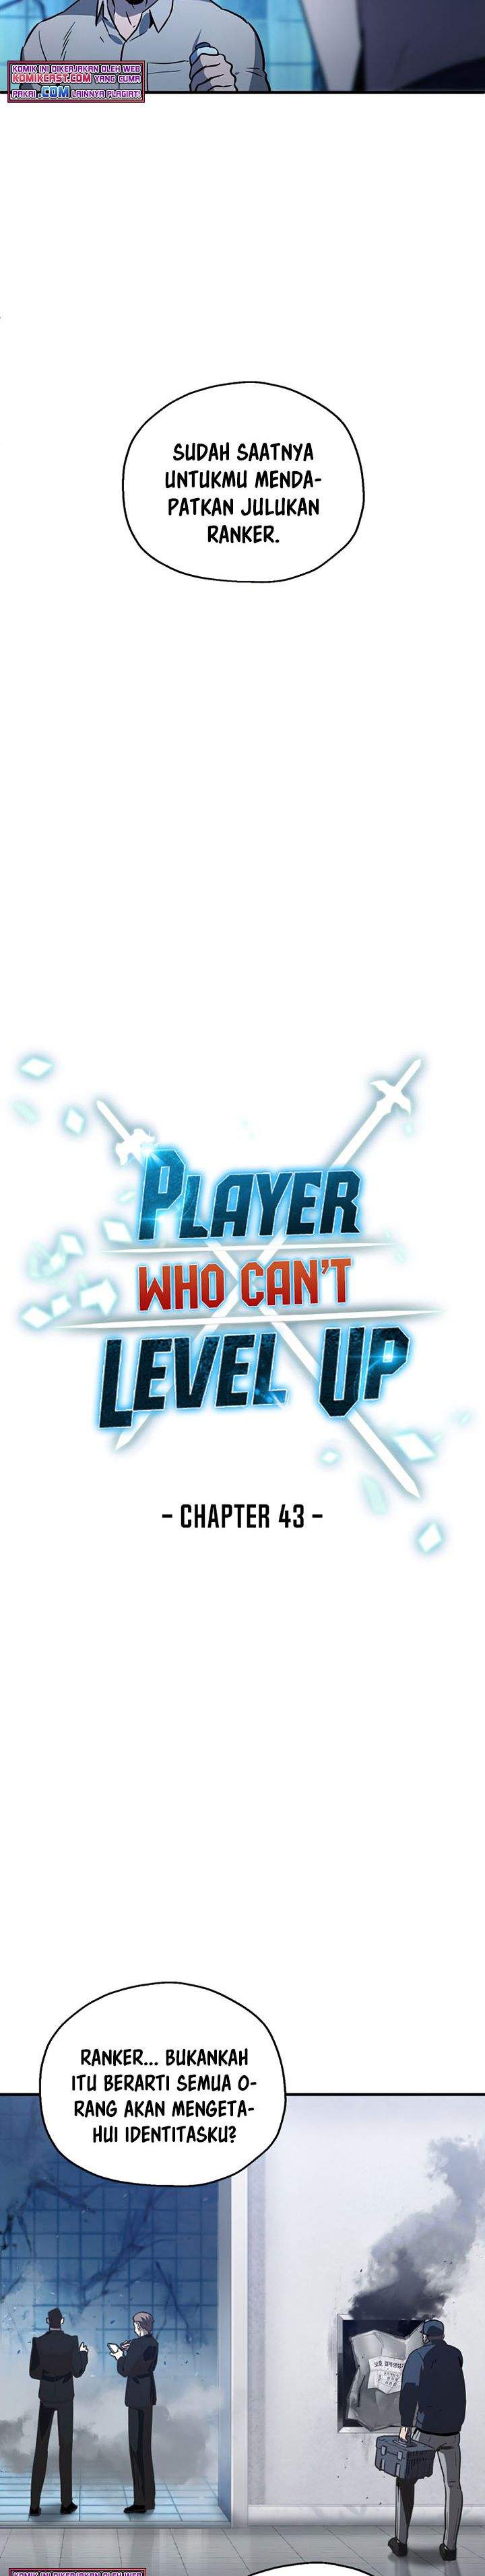 Player Who Can’t Level Up Chapter 43